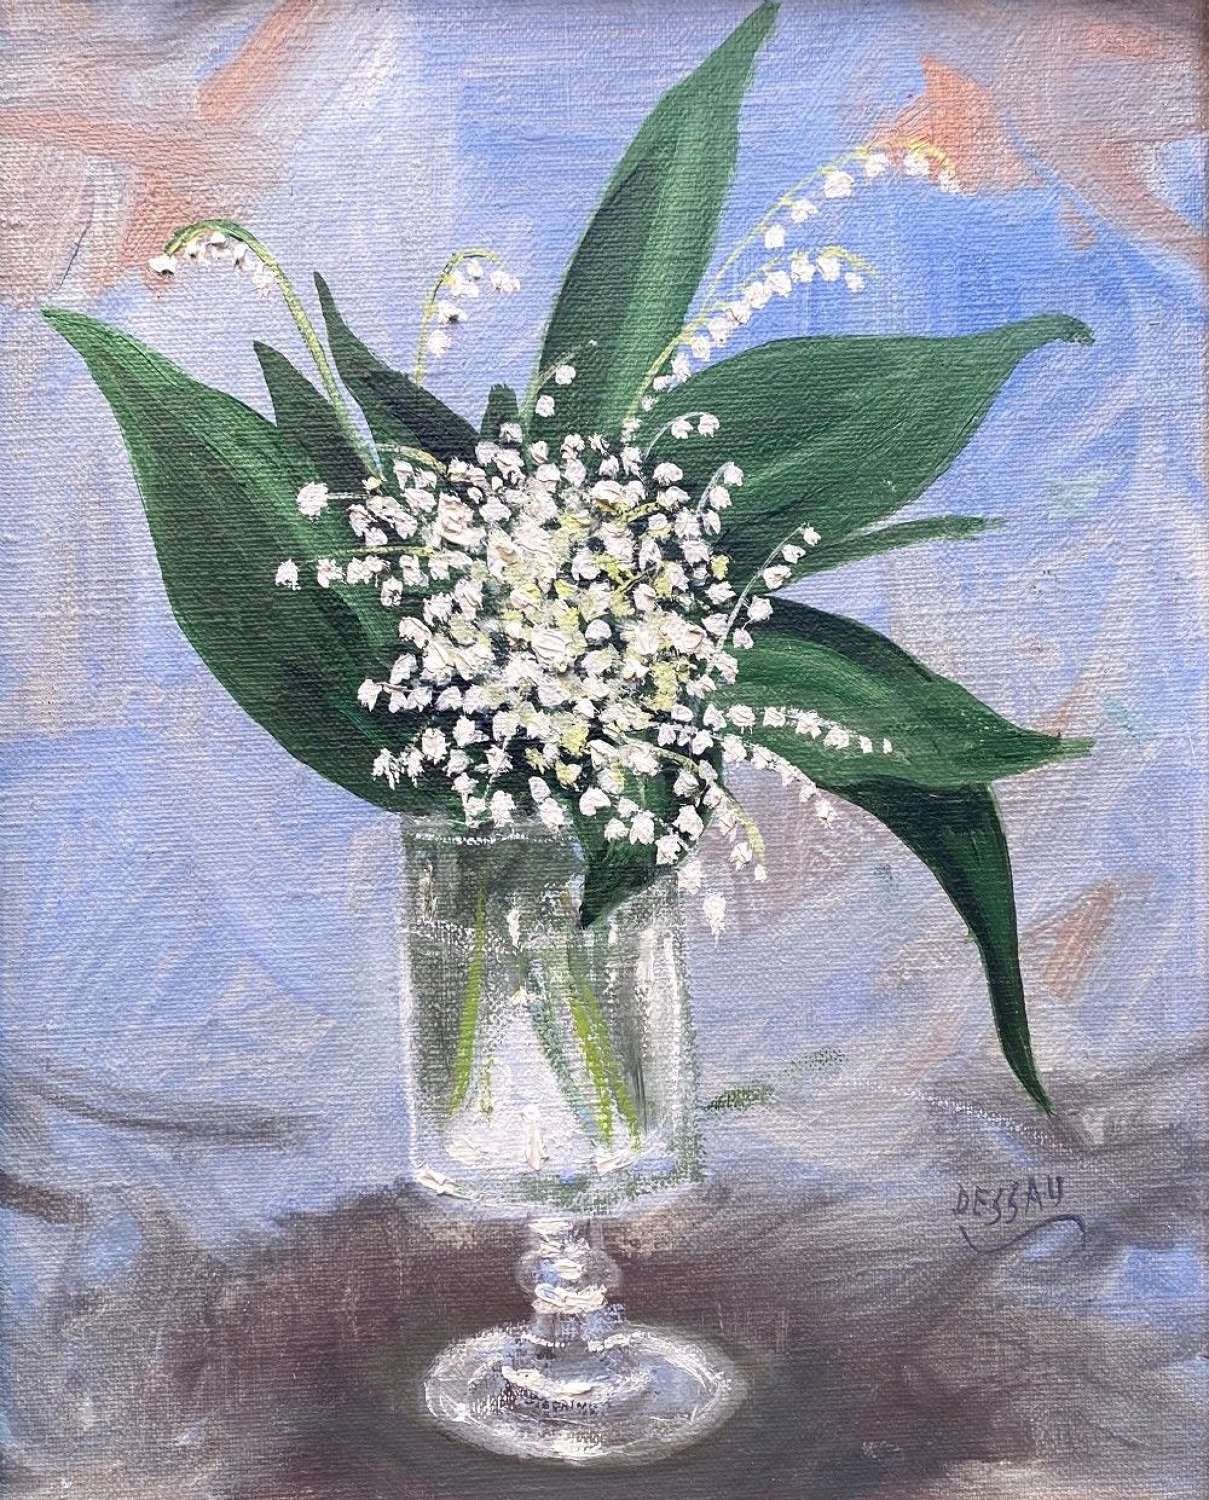 Lucien Paul Dessau: A Token Of Friendship: Lily Of The Valley Flowers